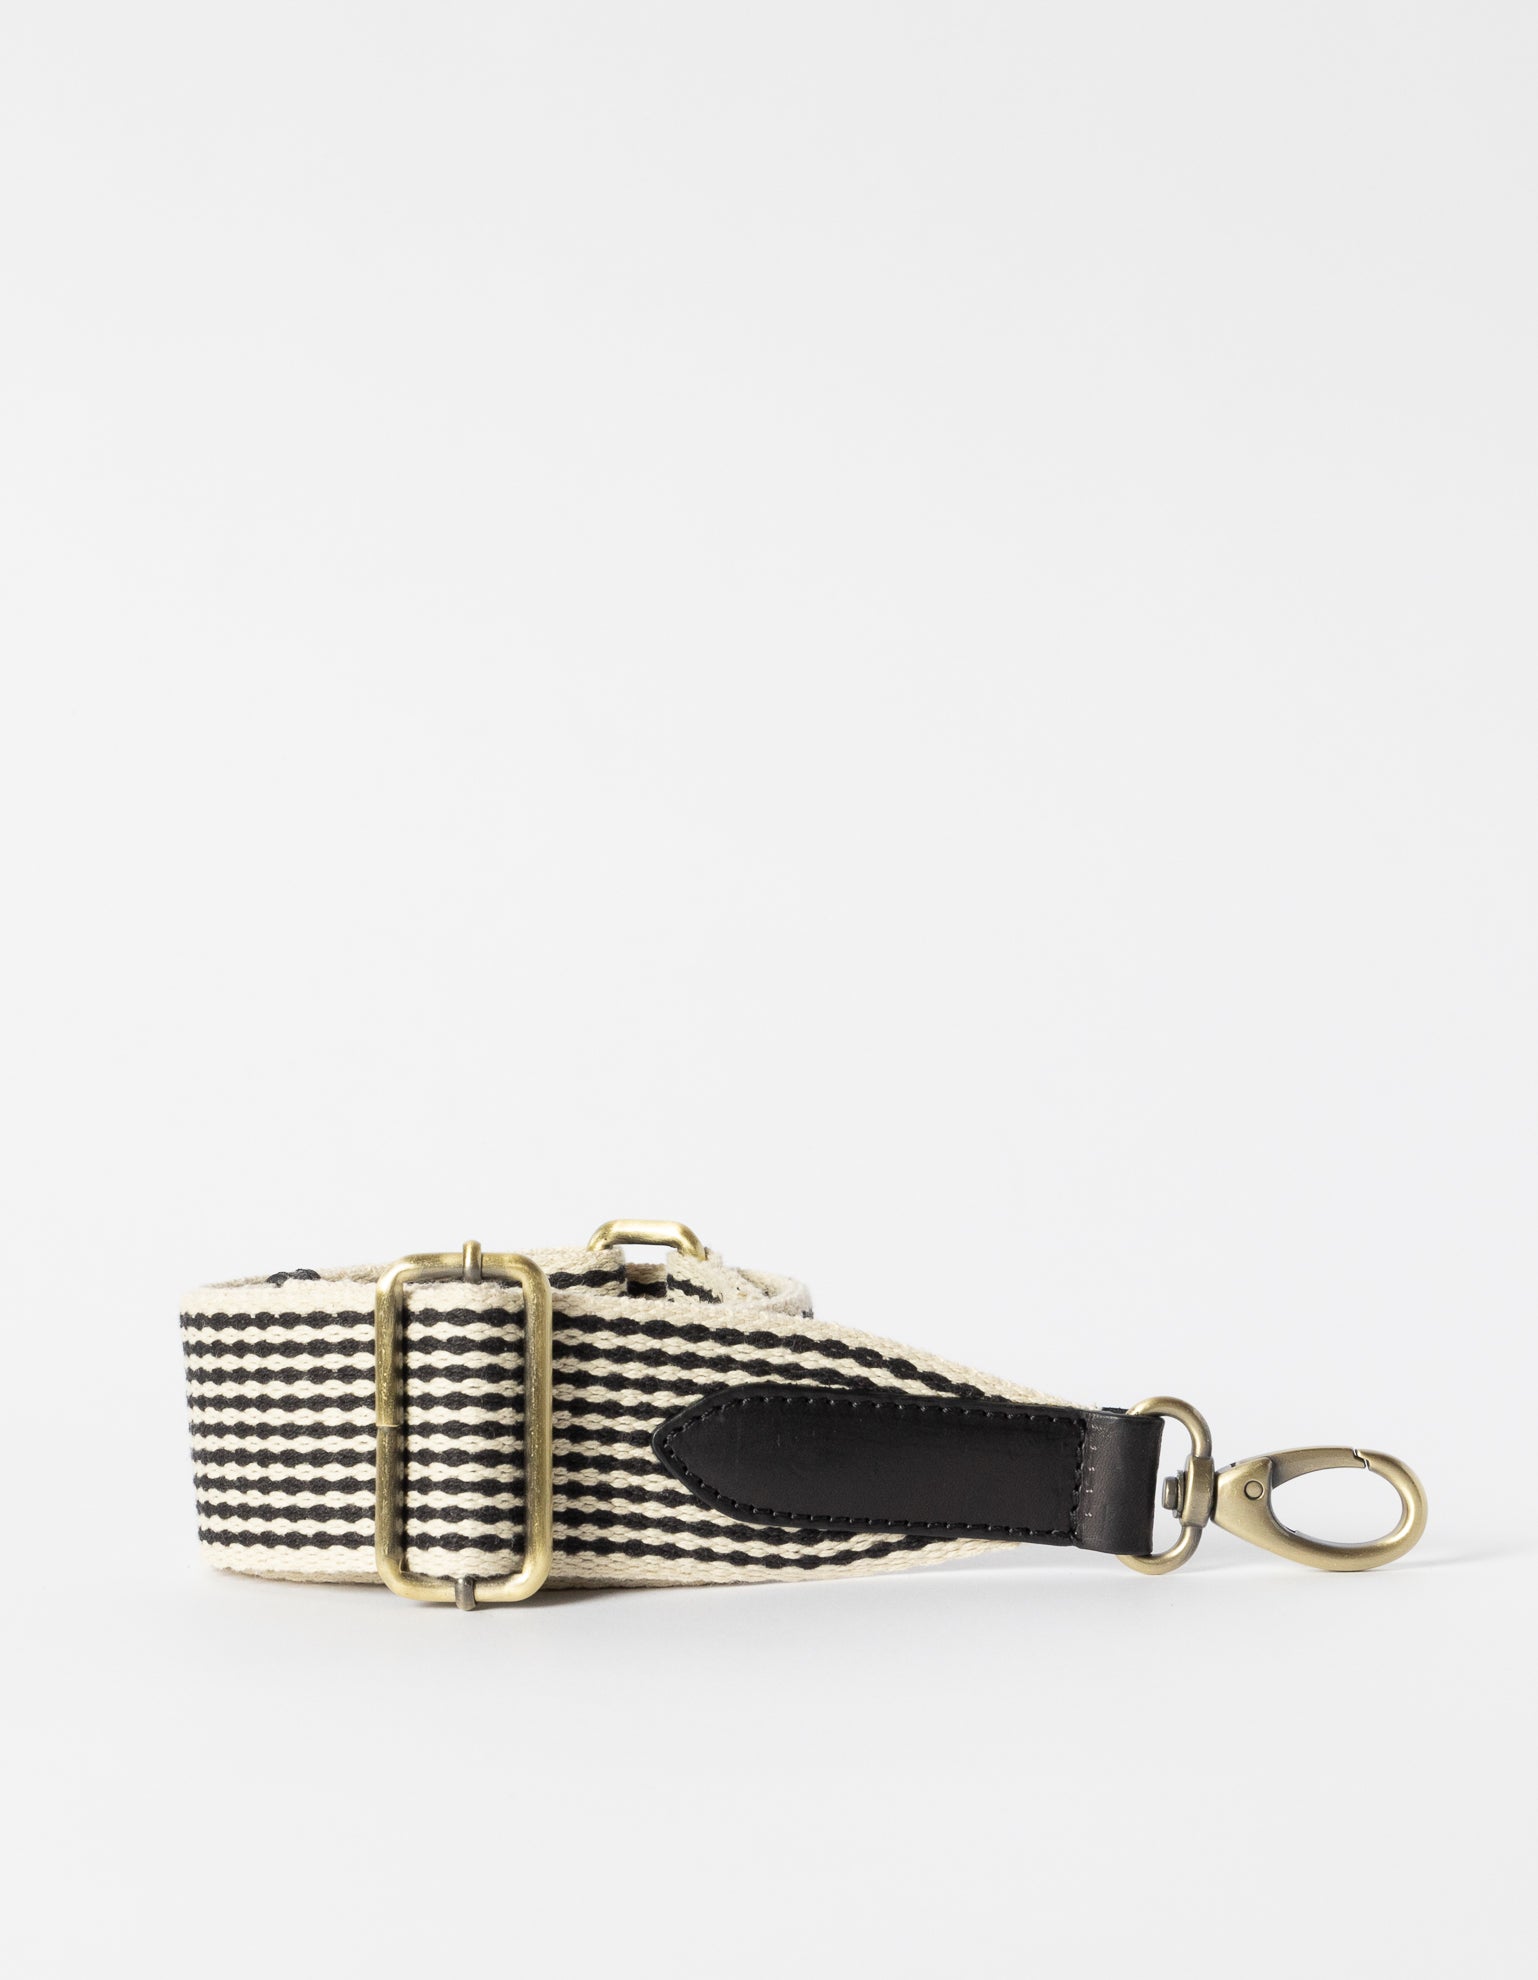 Checkered Webbing Strap Product Image